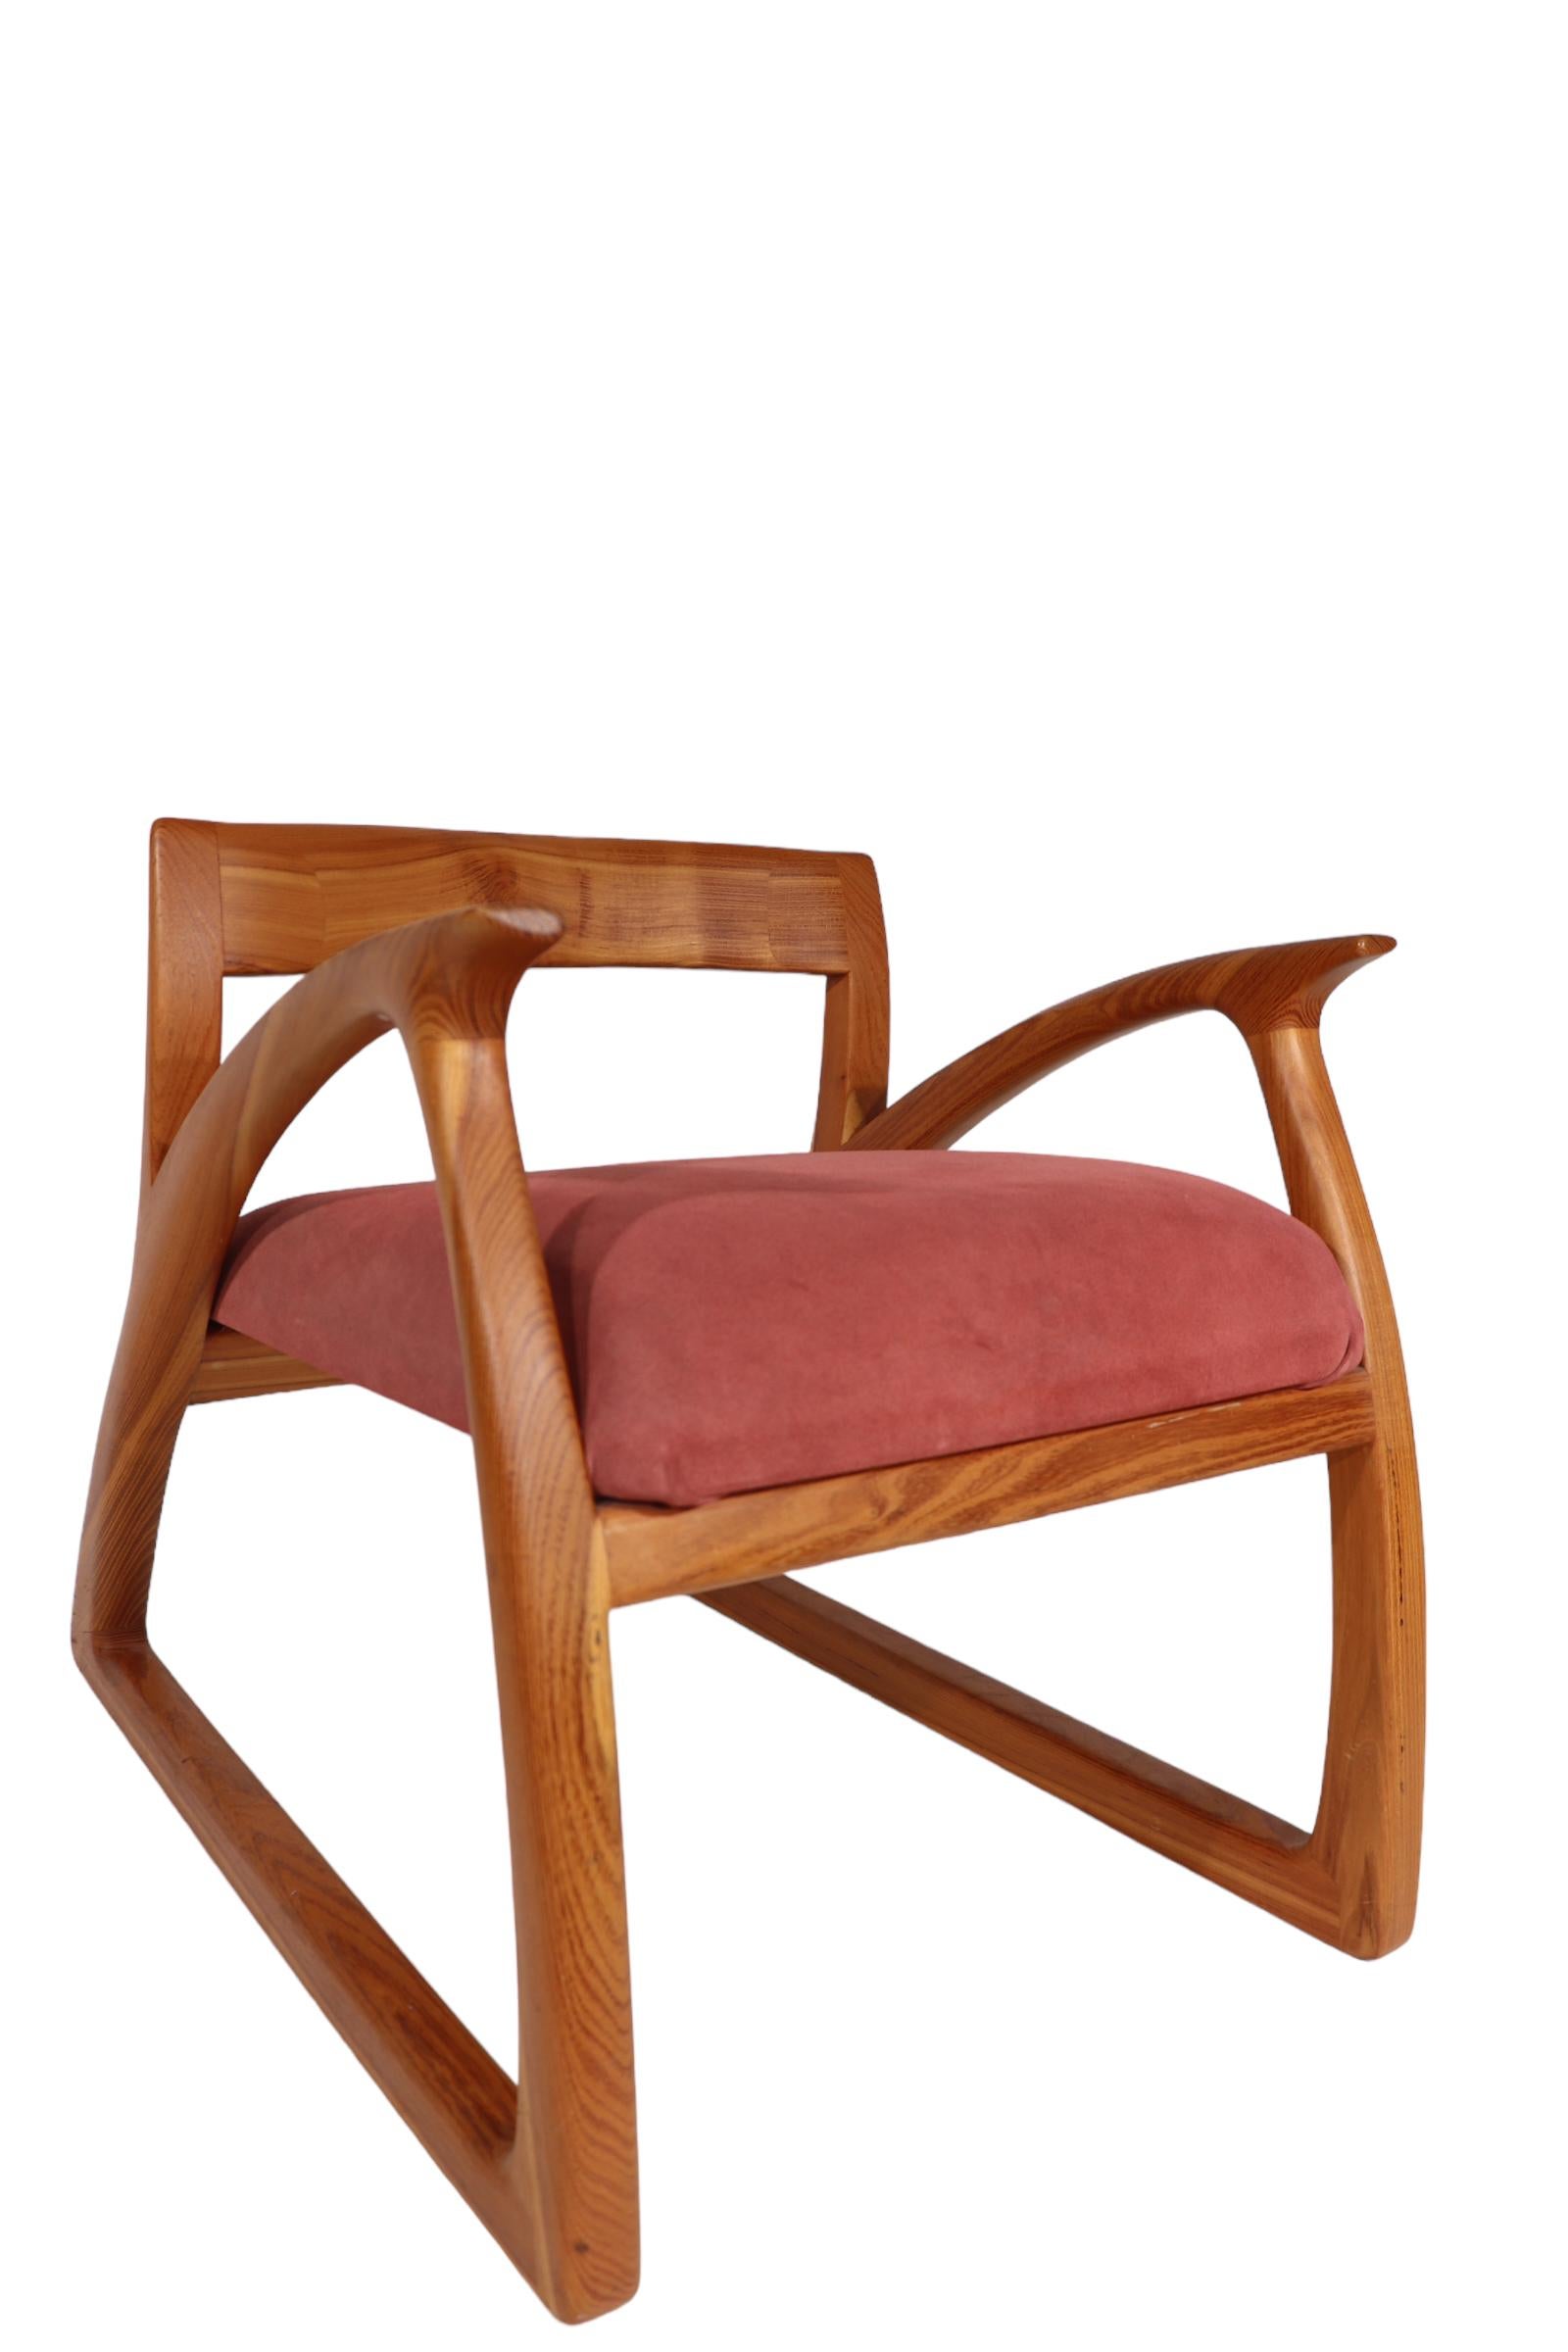 Studio Hand Made - Crafted Wood Arm / Lounge Chair For Sale 4